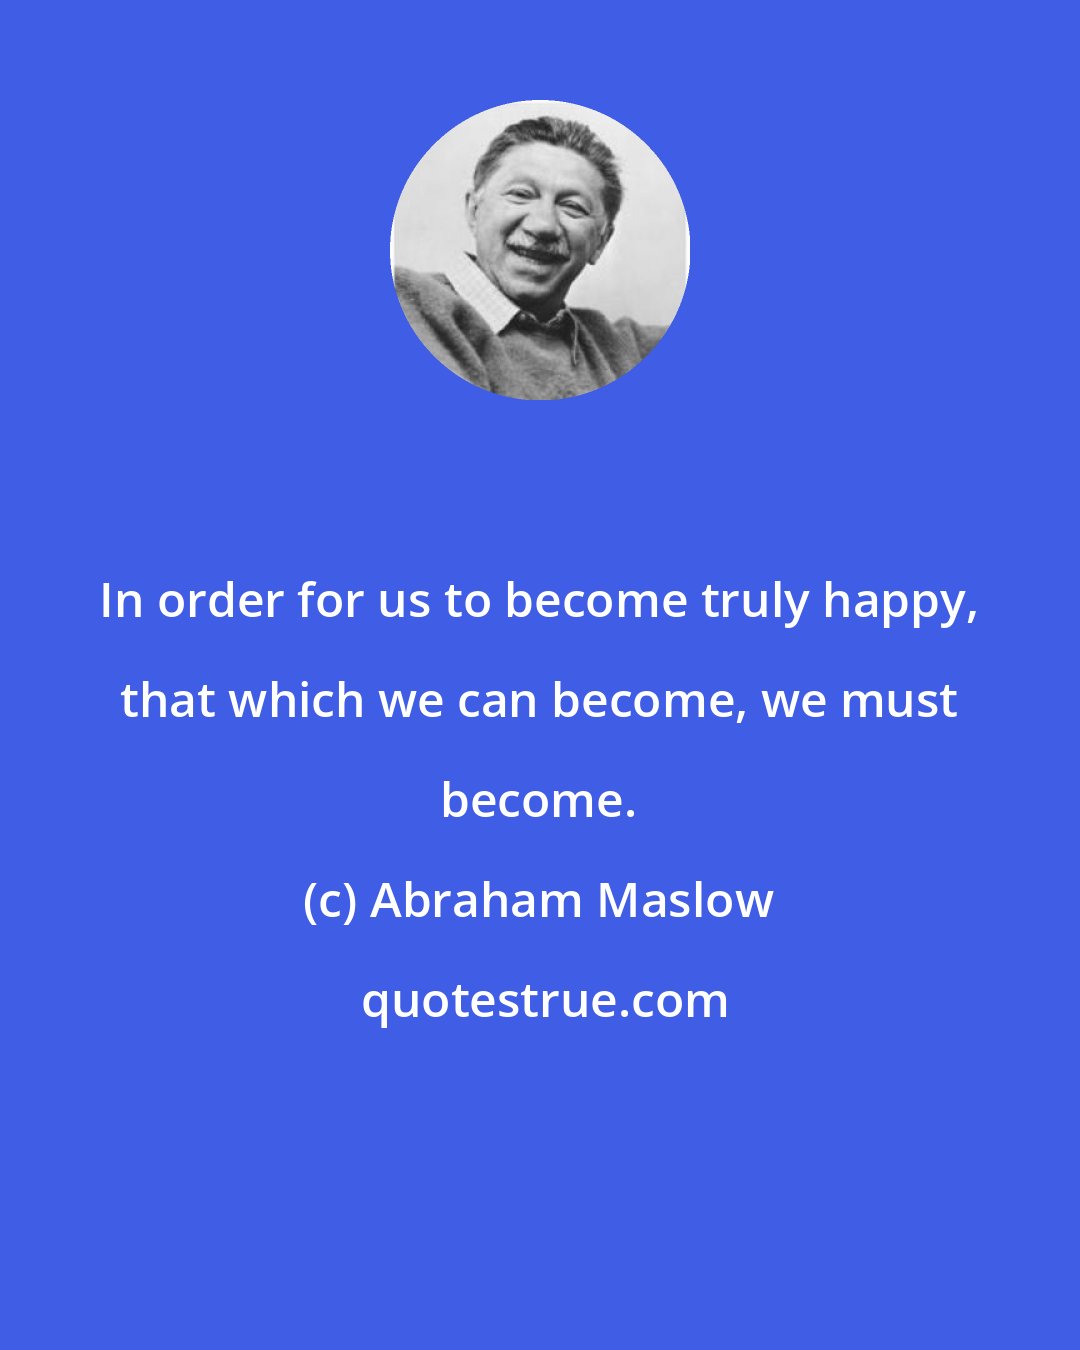 Abraham Maslow: In order for us to become truly happy, that which we can become, we must become.